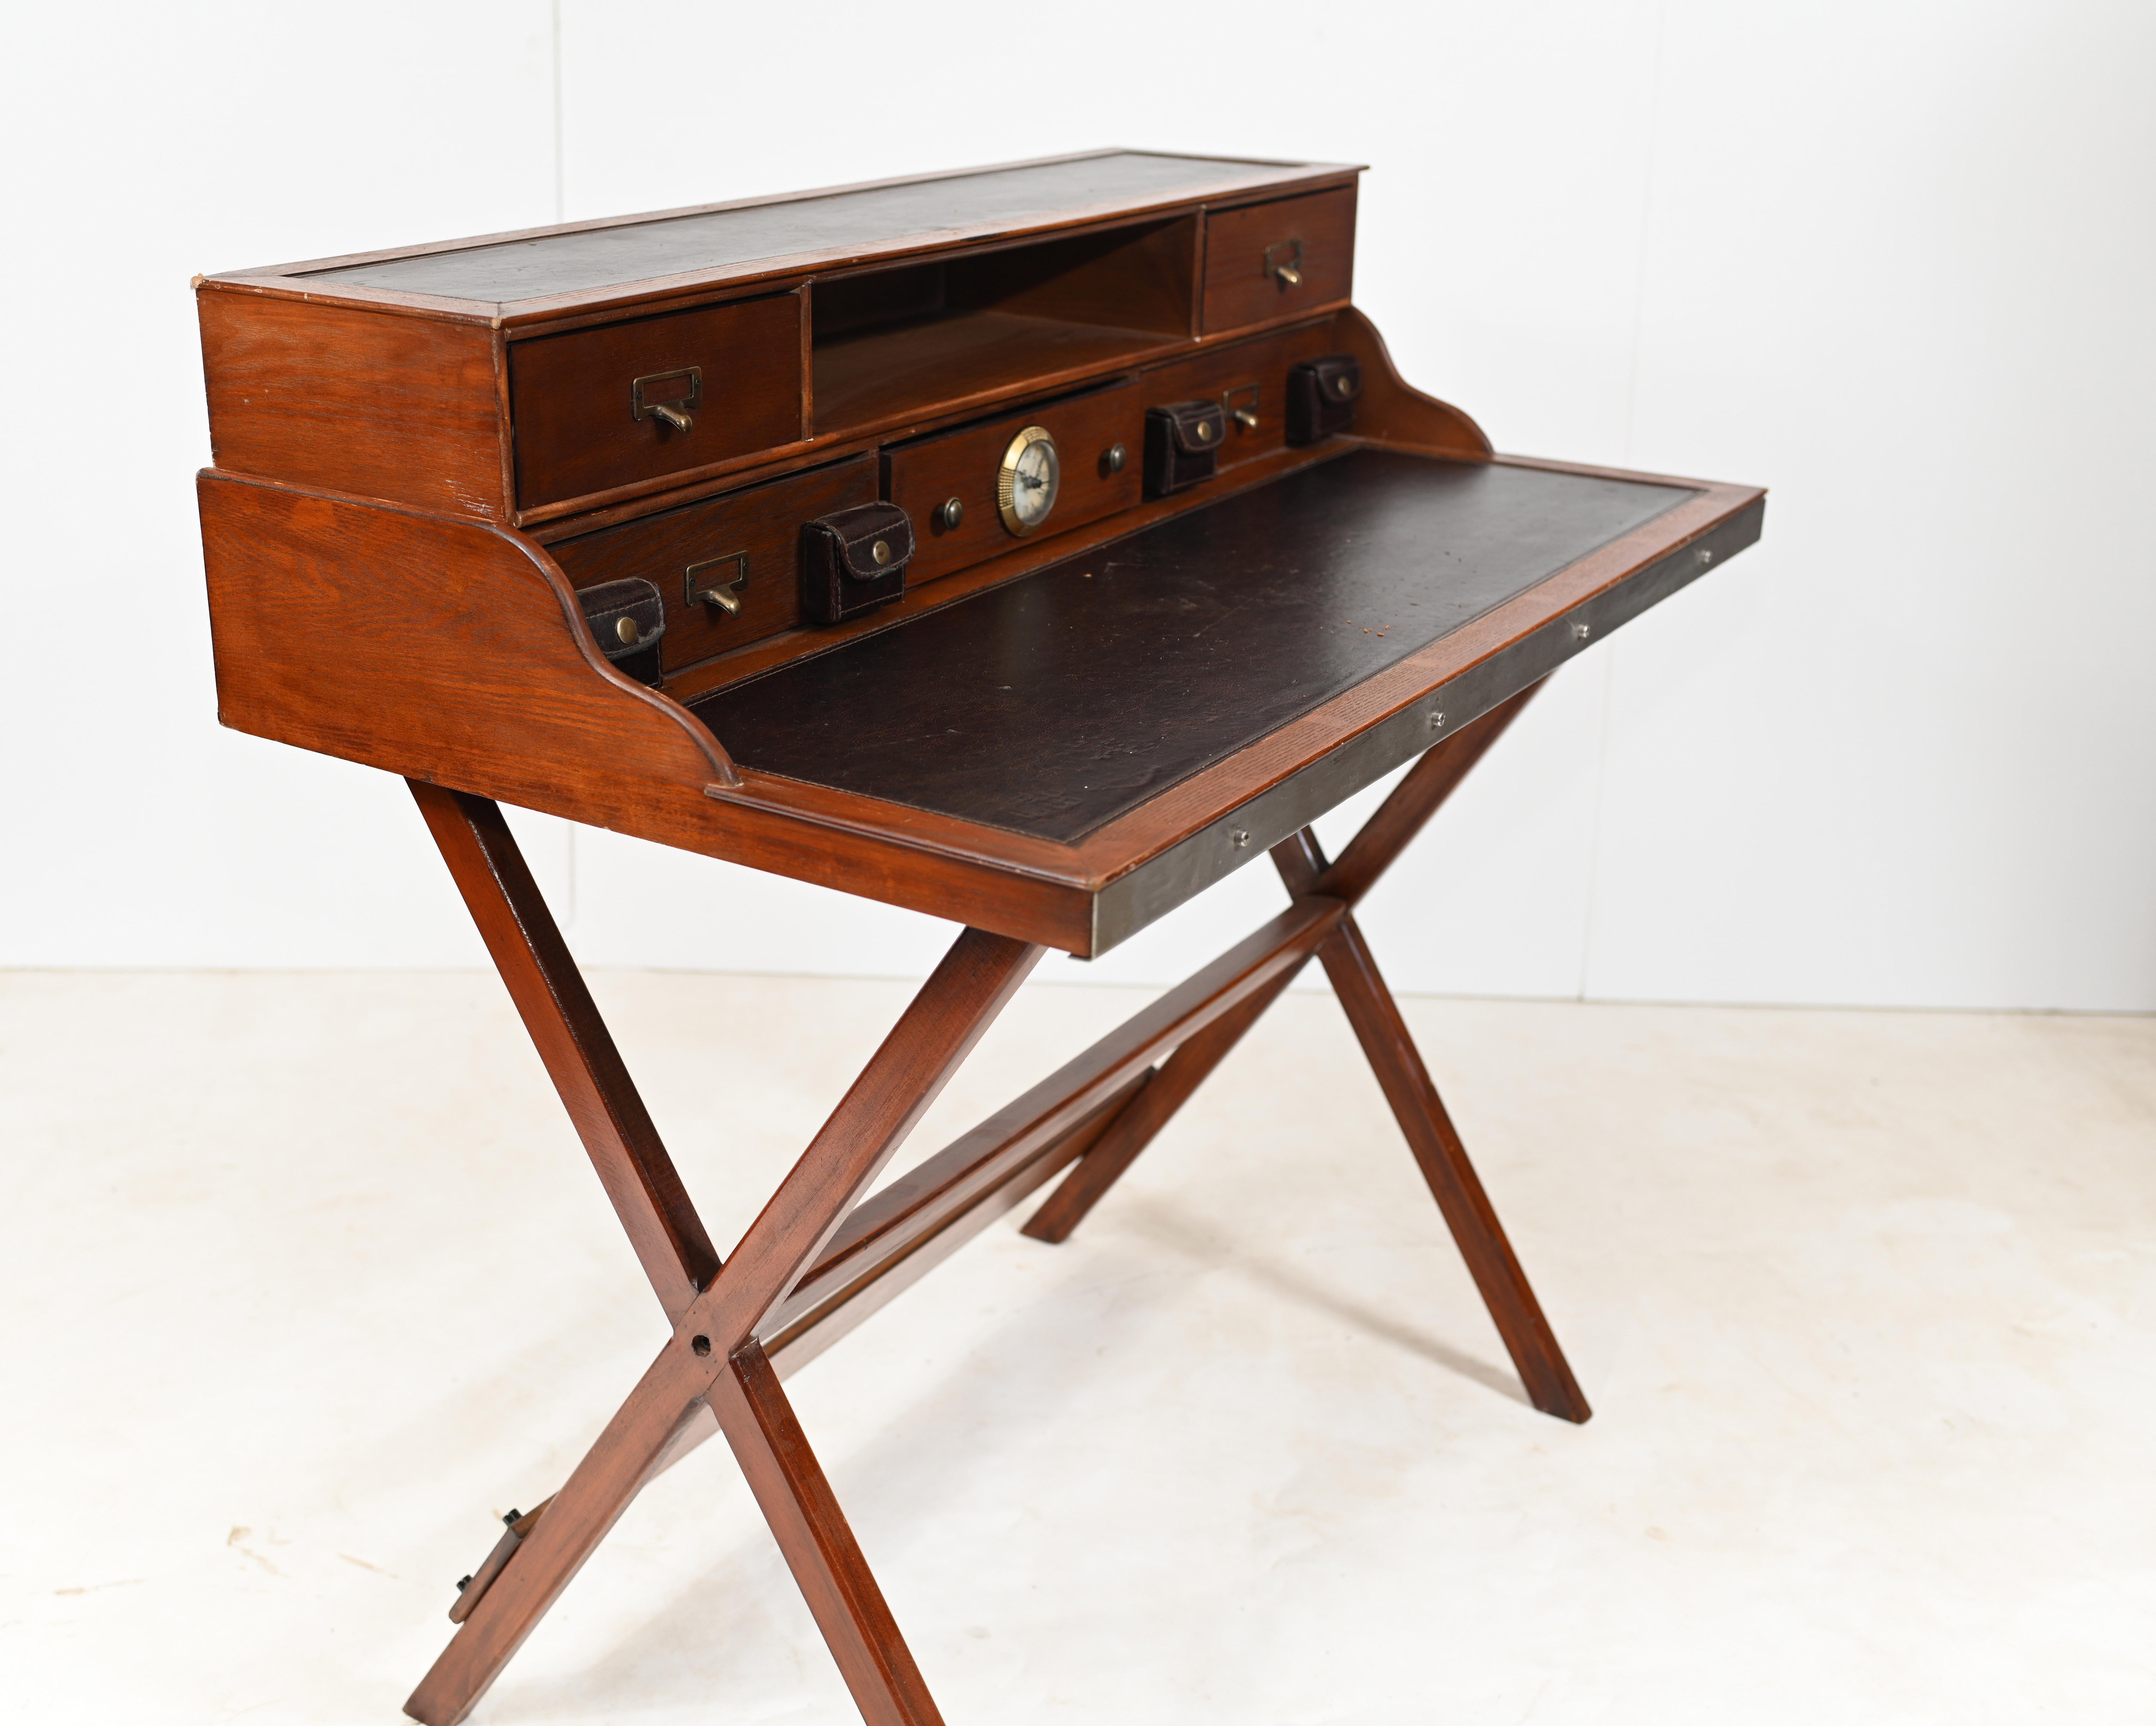 Other Campaign Desk 1930s Folding Writing Table